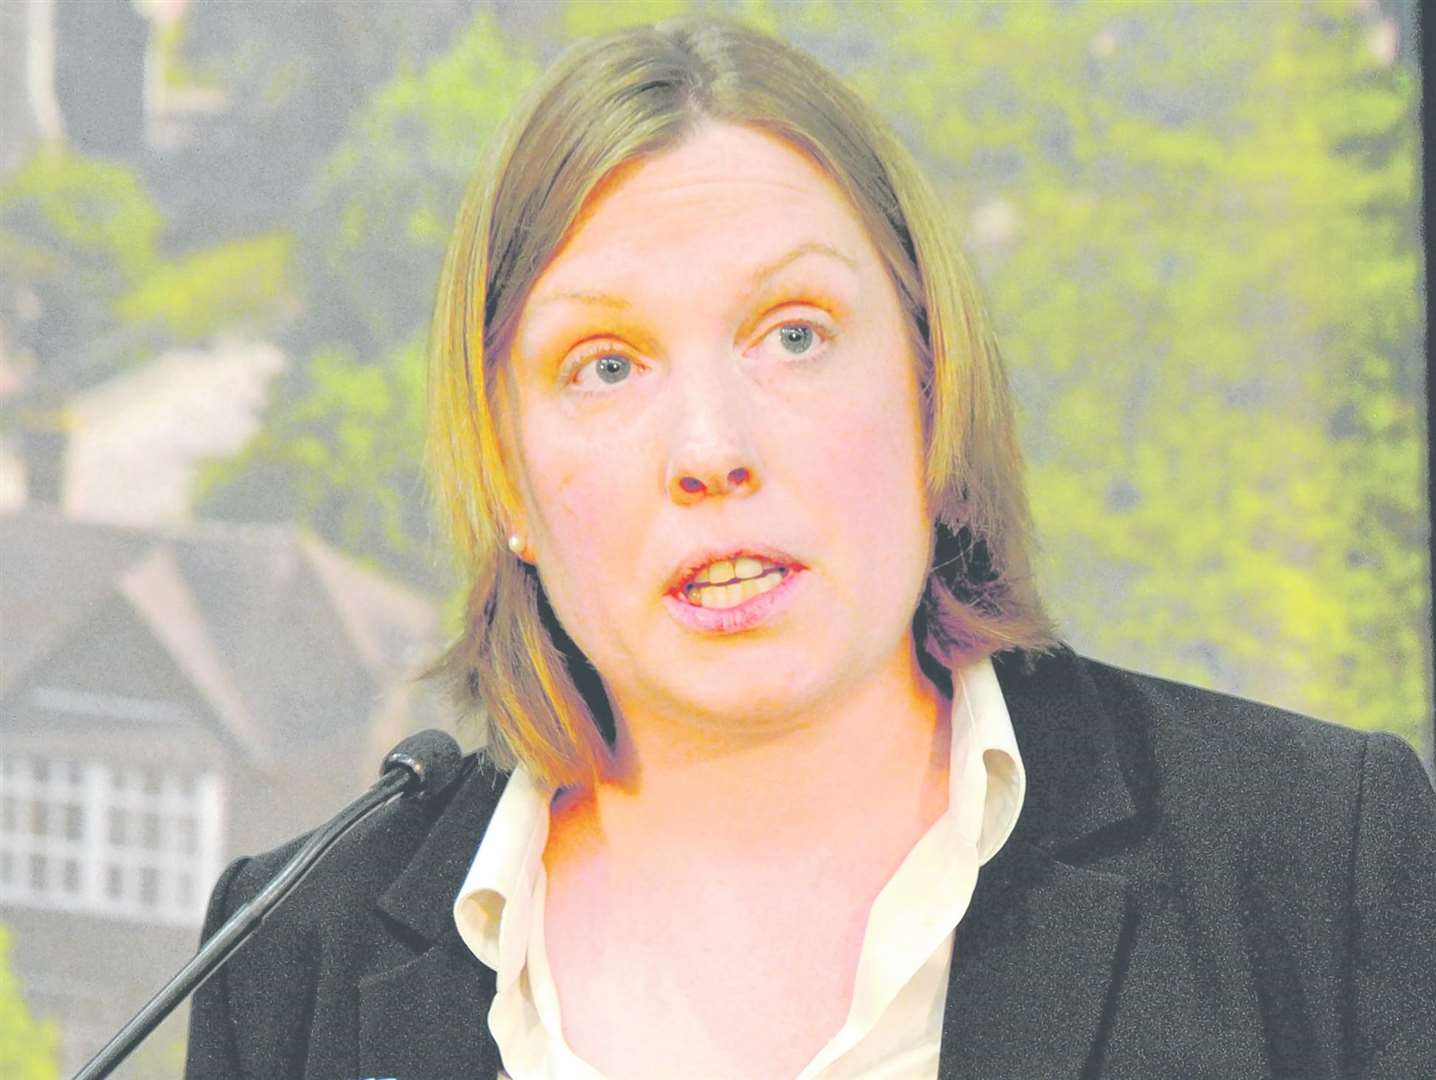 Tracey Crouch resigned as a minister over delays to introducing tougher regulations on fixed odds betting terminals